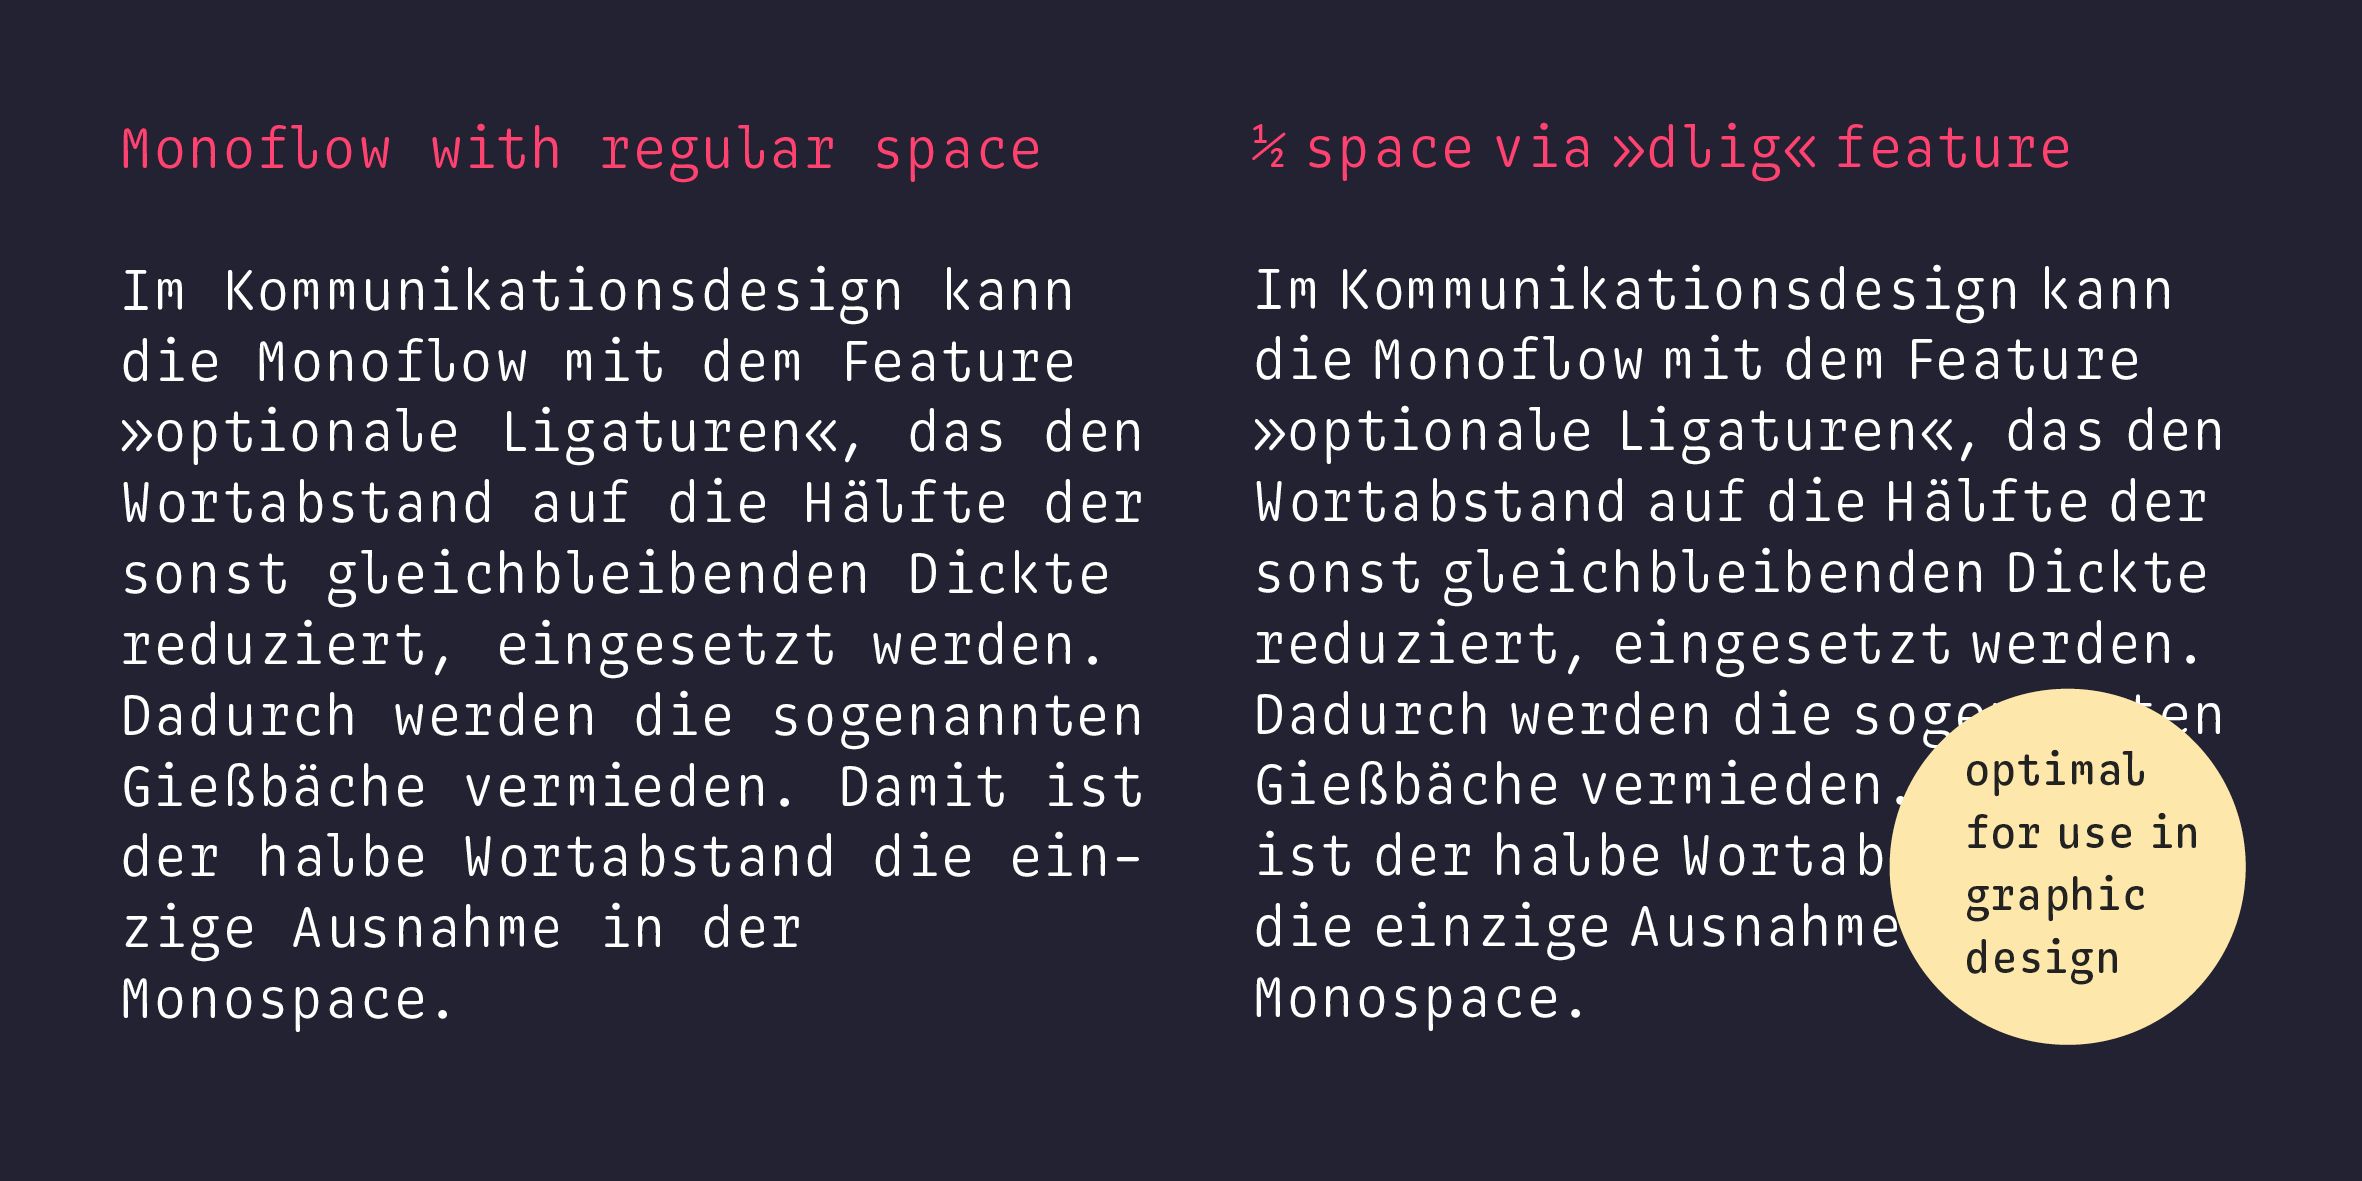 Monoflow Poster: Comparison of copytext with regular space character and half-width space character (included via OpenType feature 